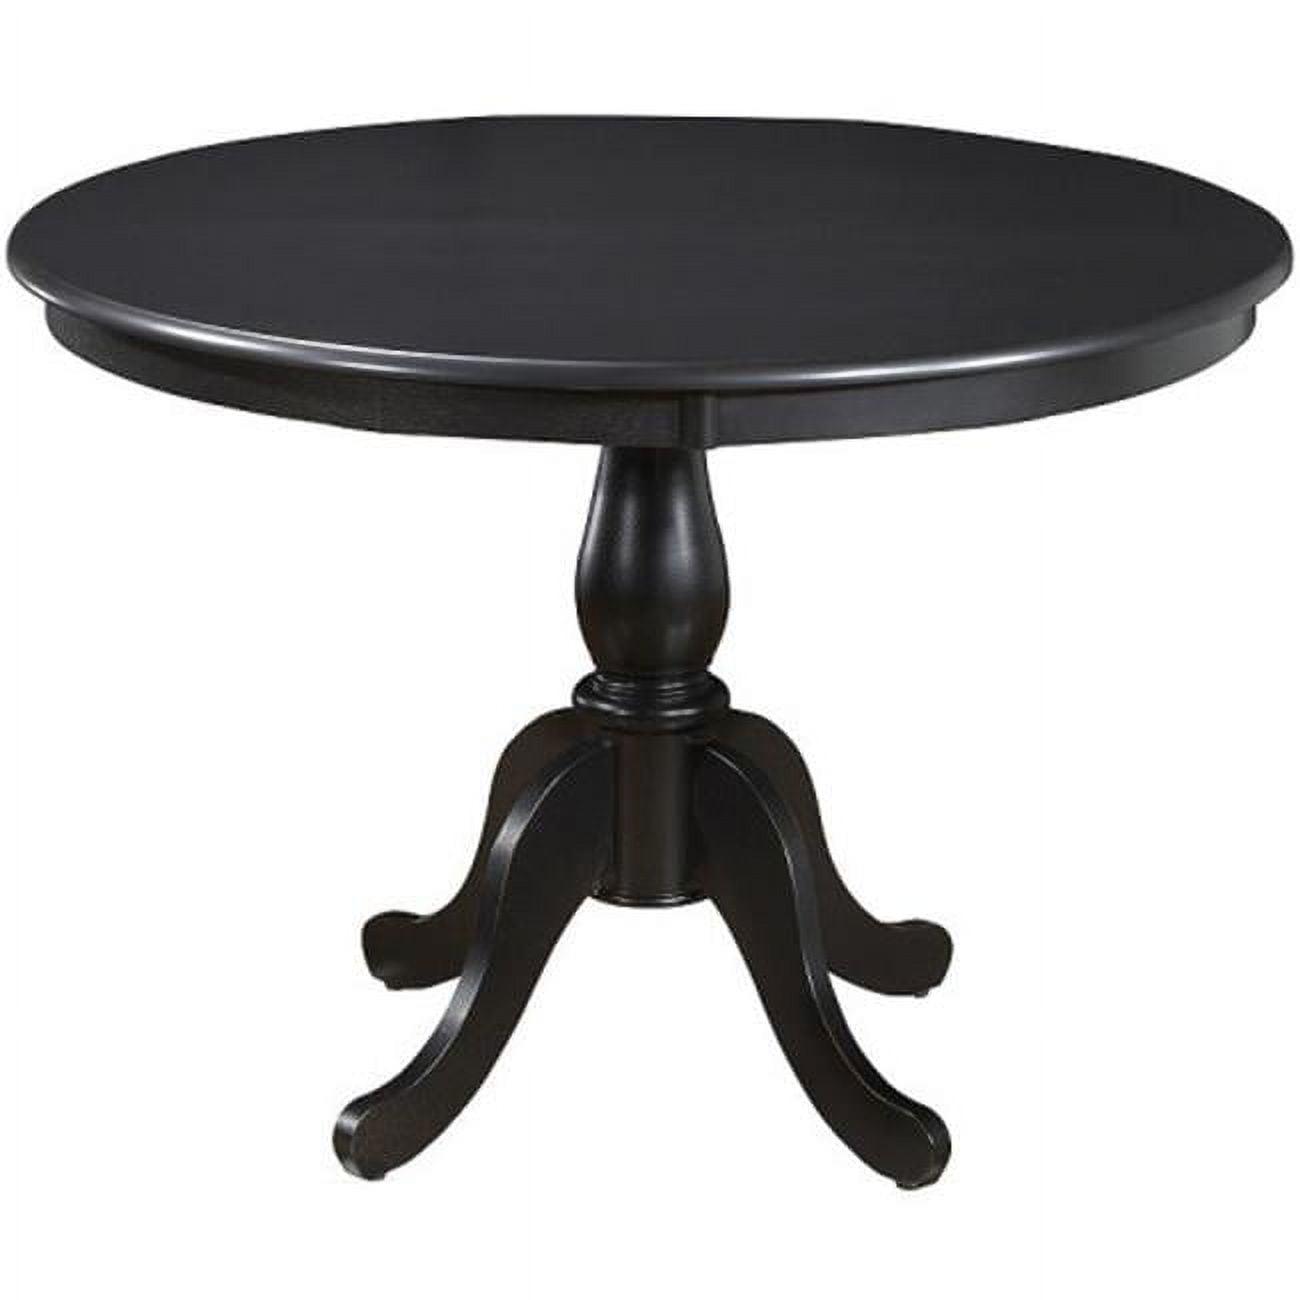 Fairview Antique Black 42" Round Pedestal Wood Dining Table